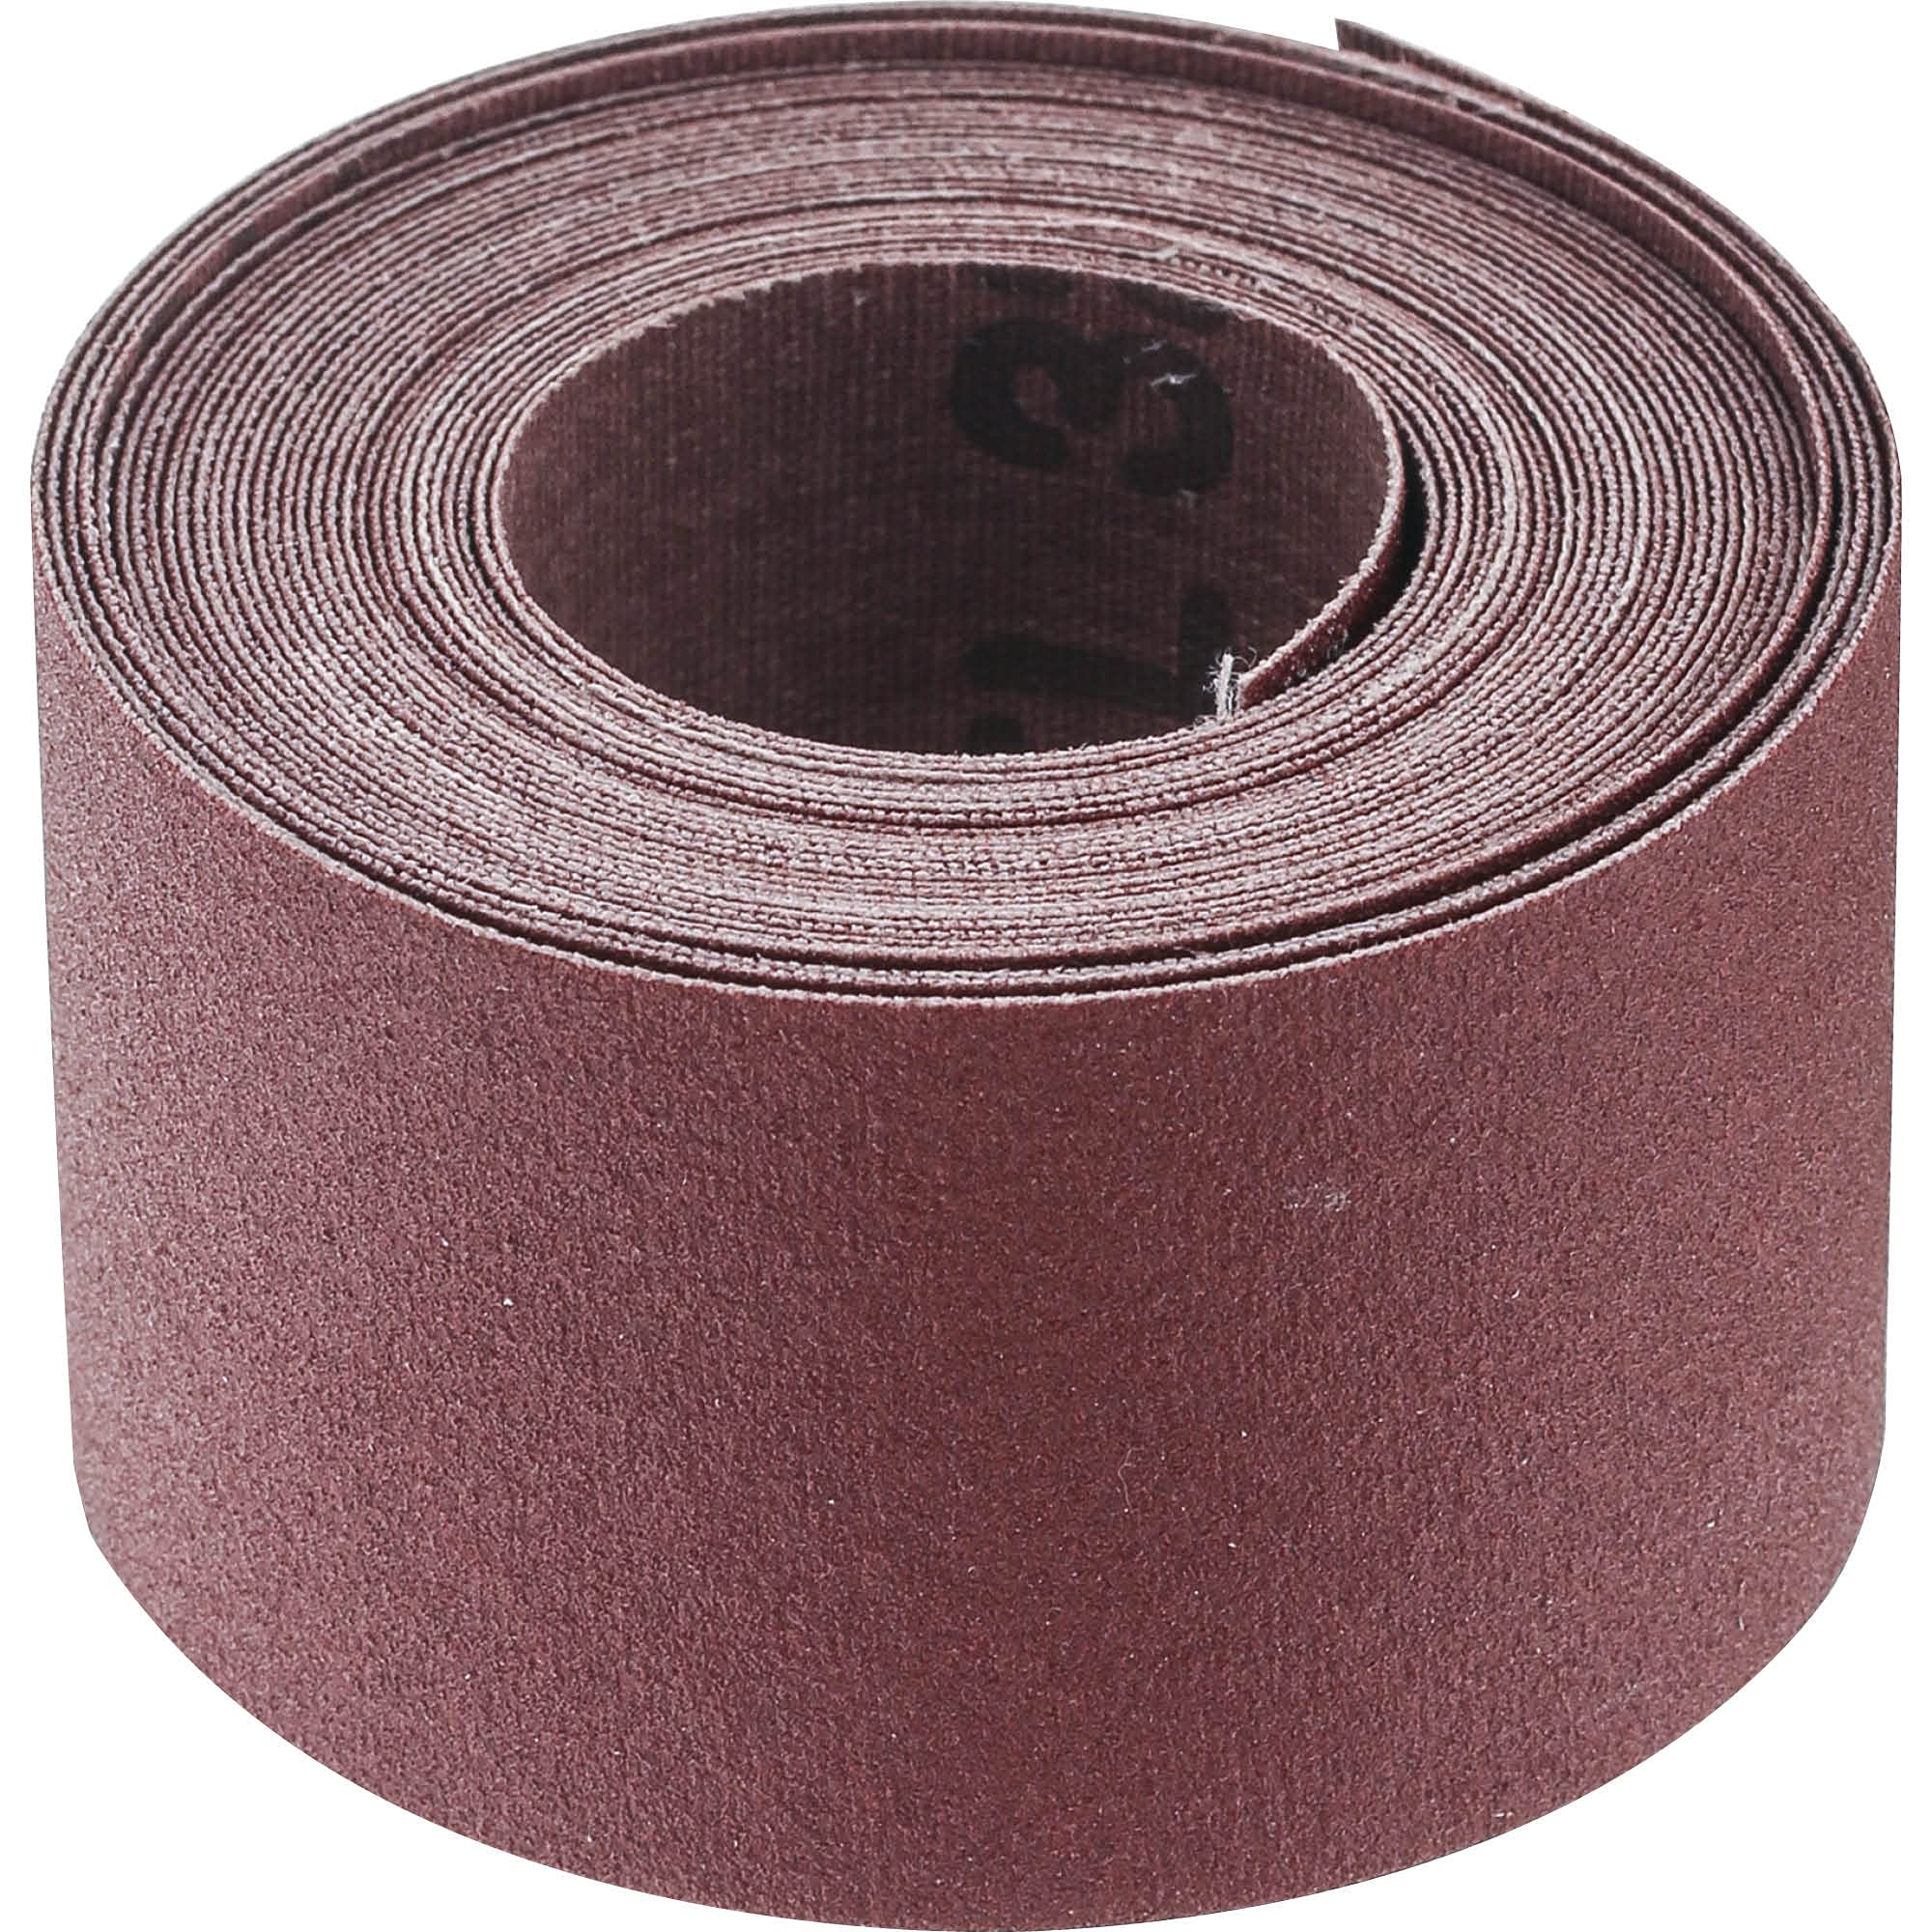 1-1/2" X 15' Steelex Emery Cloth Roll (100 Grit) $3.95 + Free Shipping w/ Prime or on $25+